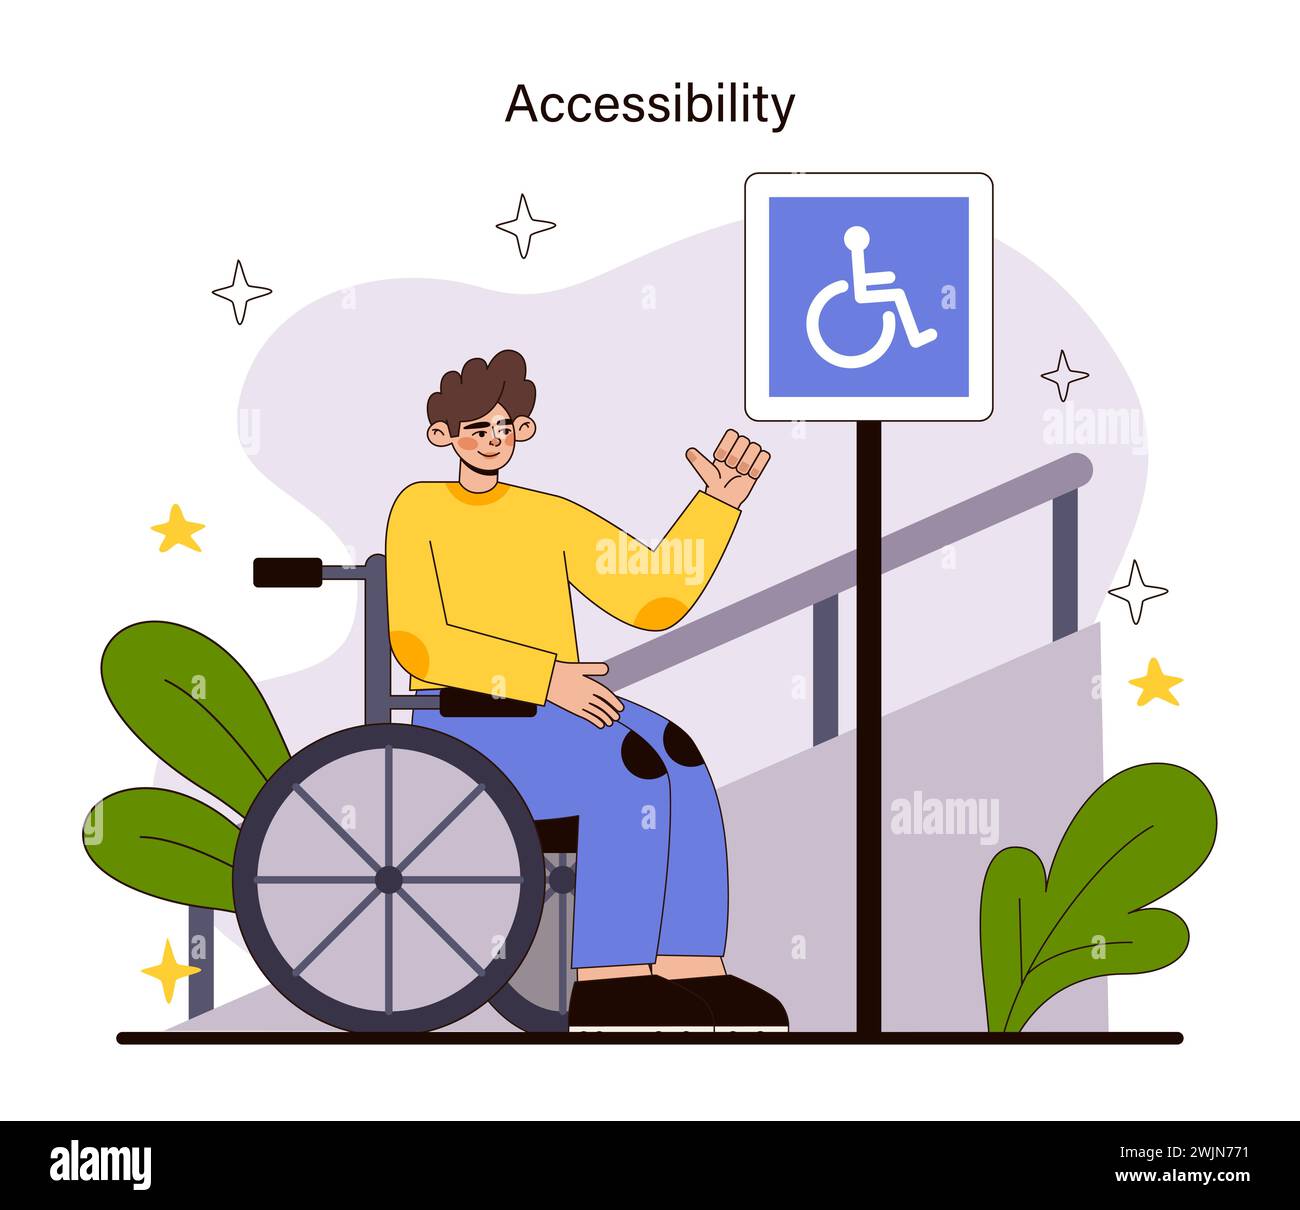 Accessibility concept. A person in a wheelchair greets the day with optimism near an accessibility sign, depicting barrier-free movement and inclusive public spaces. Flat vector illustration. Stock Vector